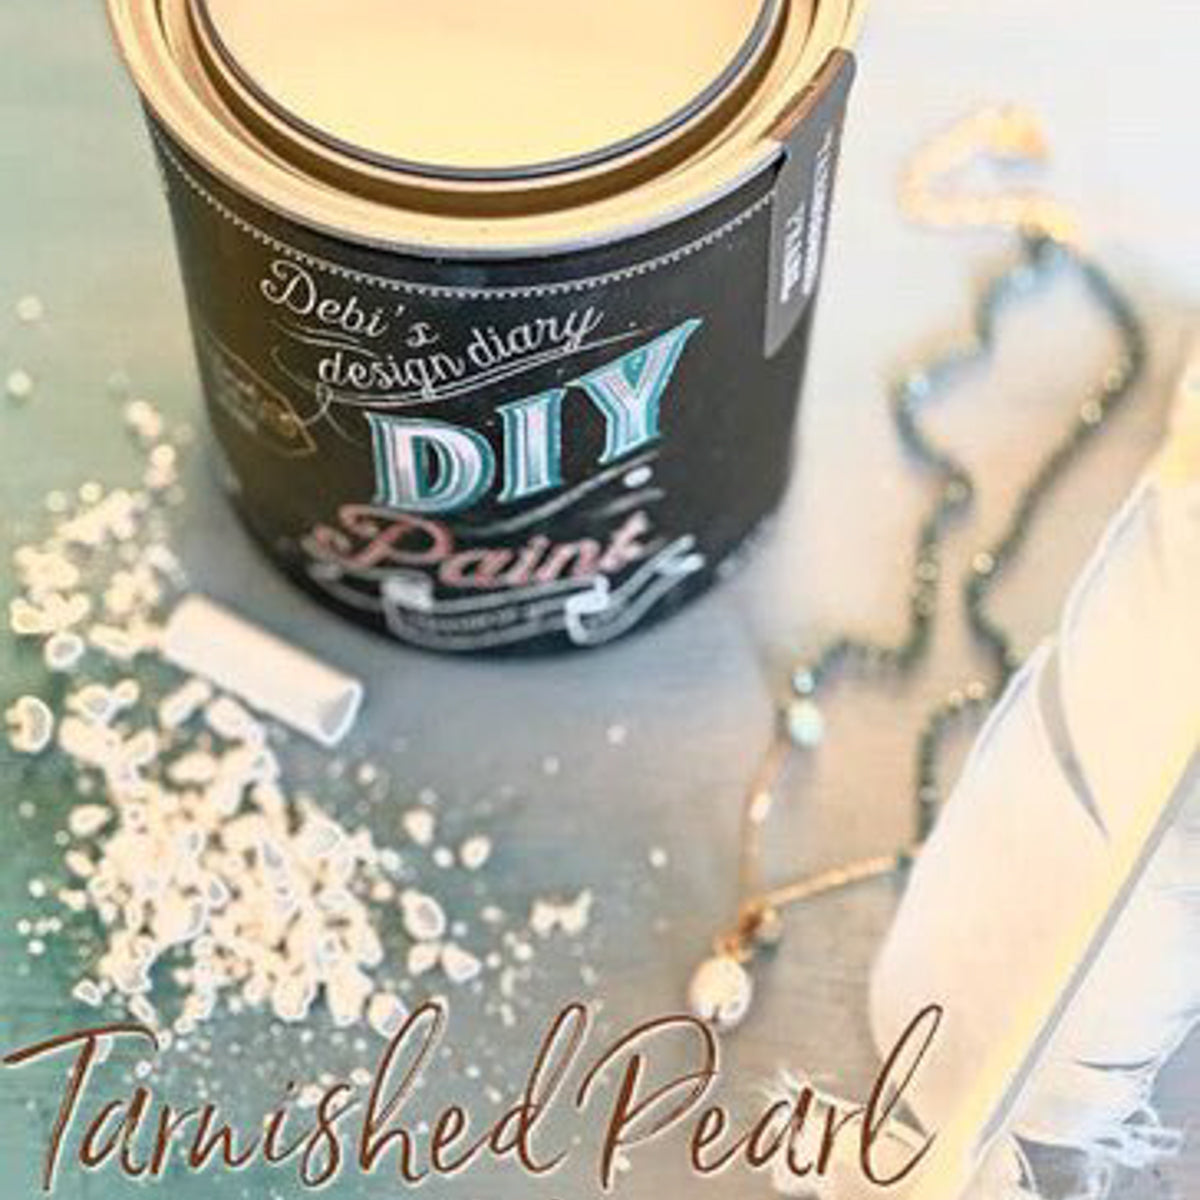 Tarnished Pearl by DIY Paint